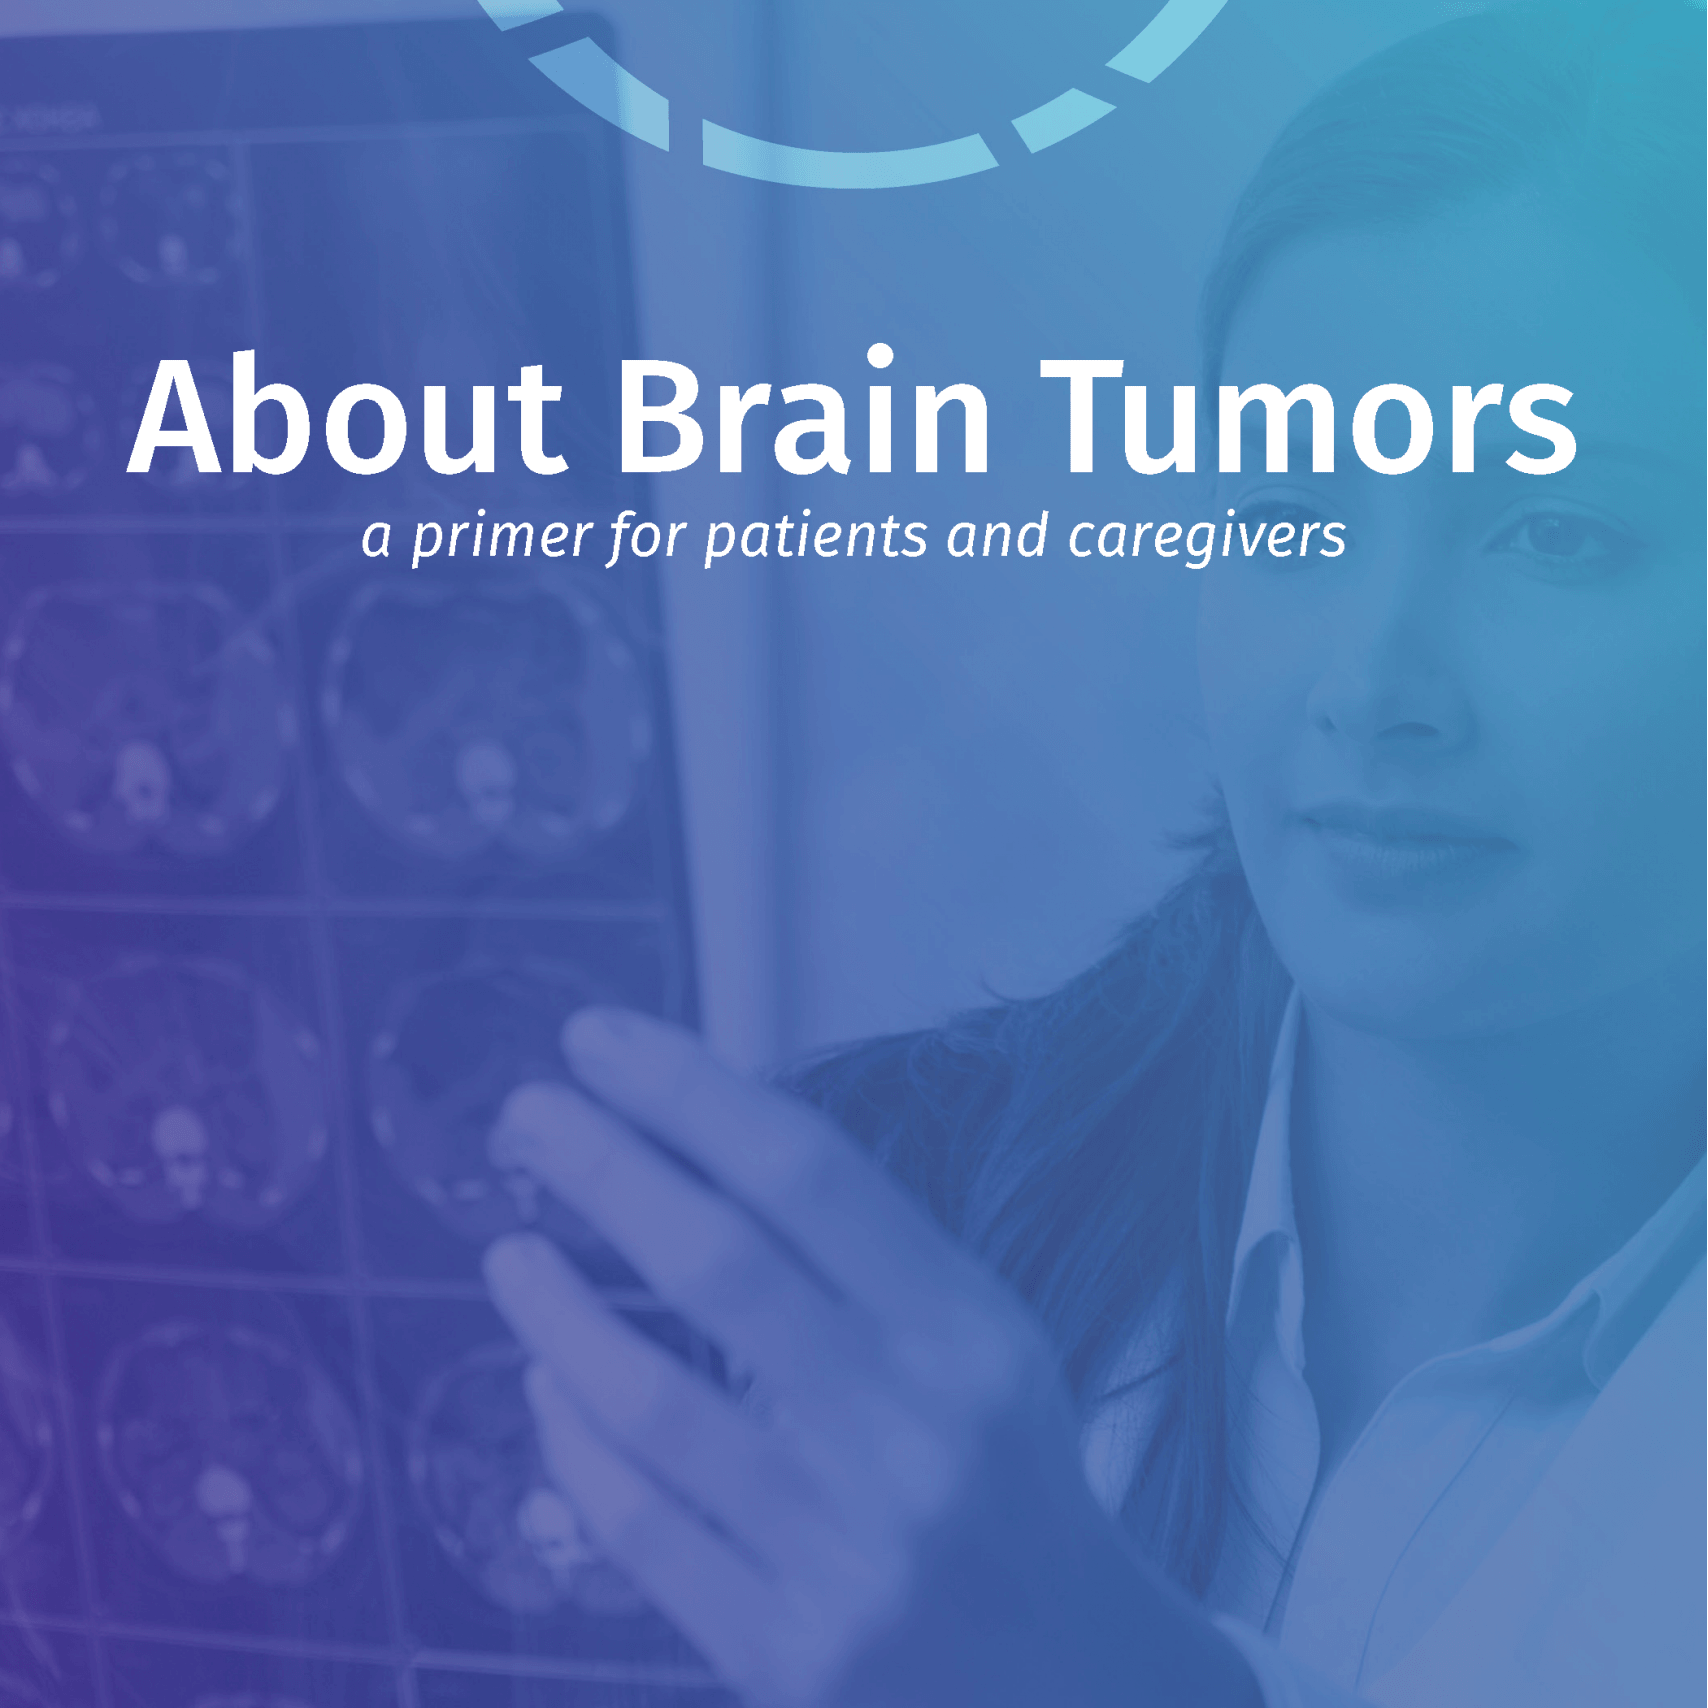 About Brain Tumors: A Primer for Patients & Caregivers